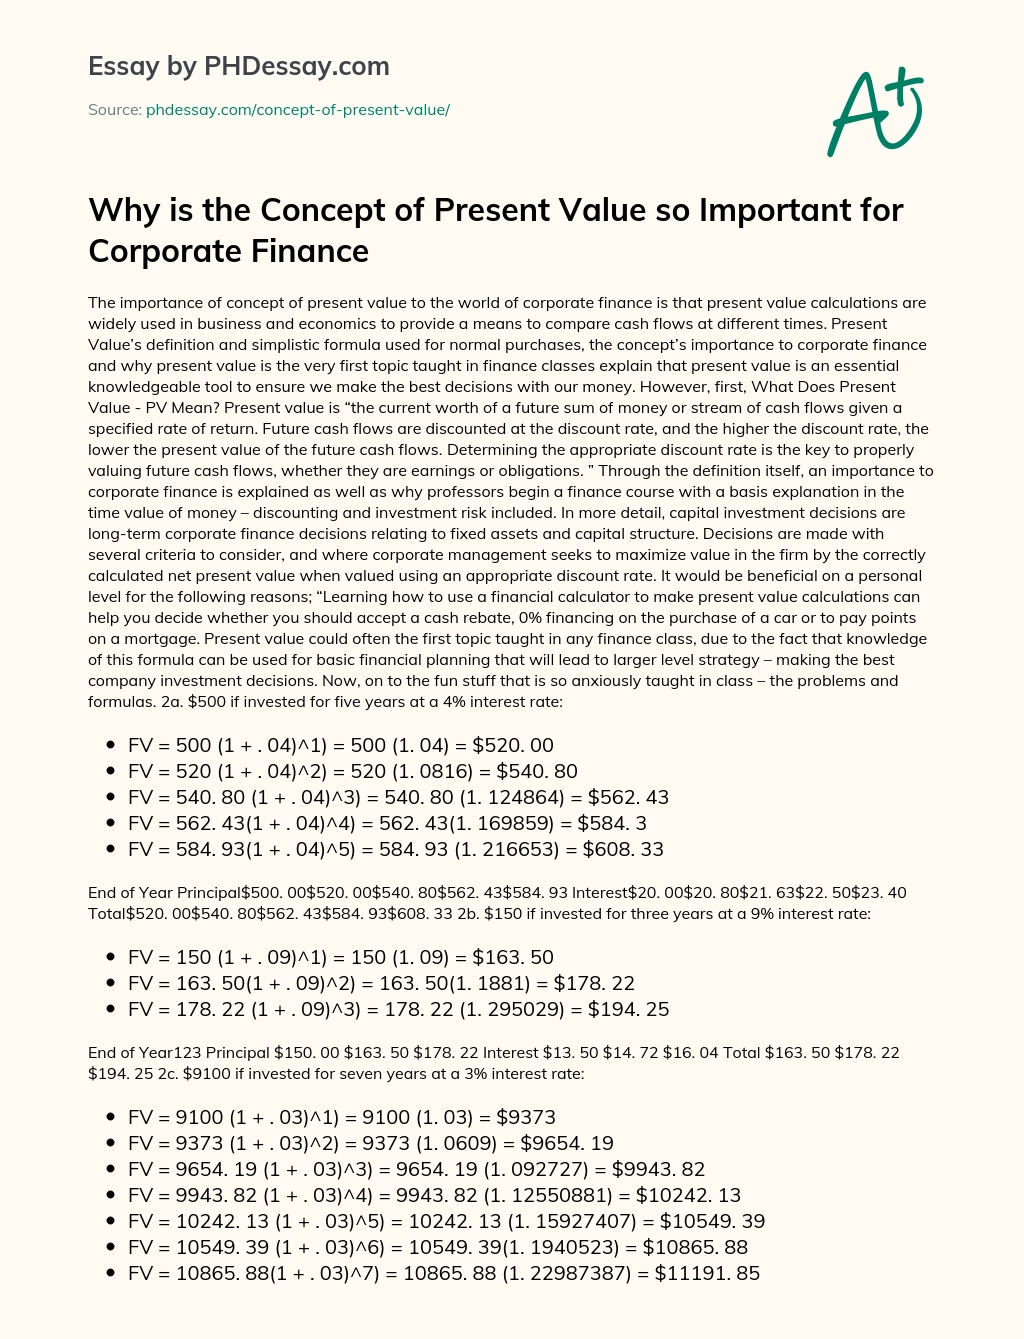 Why is the Concept of Present Value so Important for Corporate Finance essay